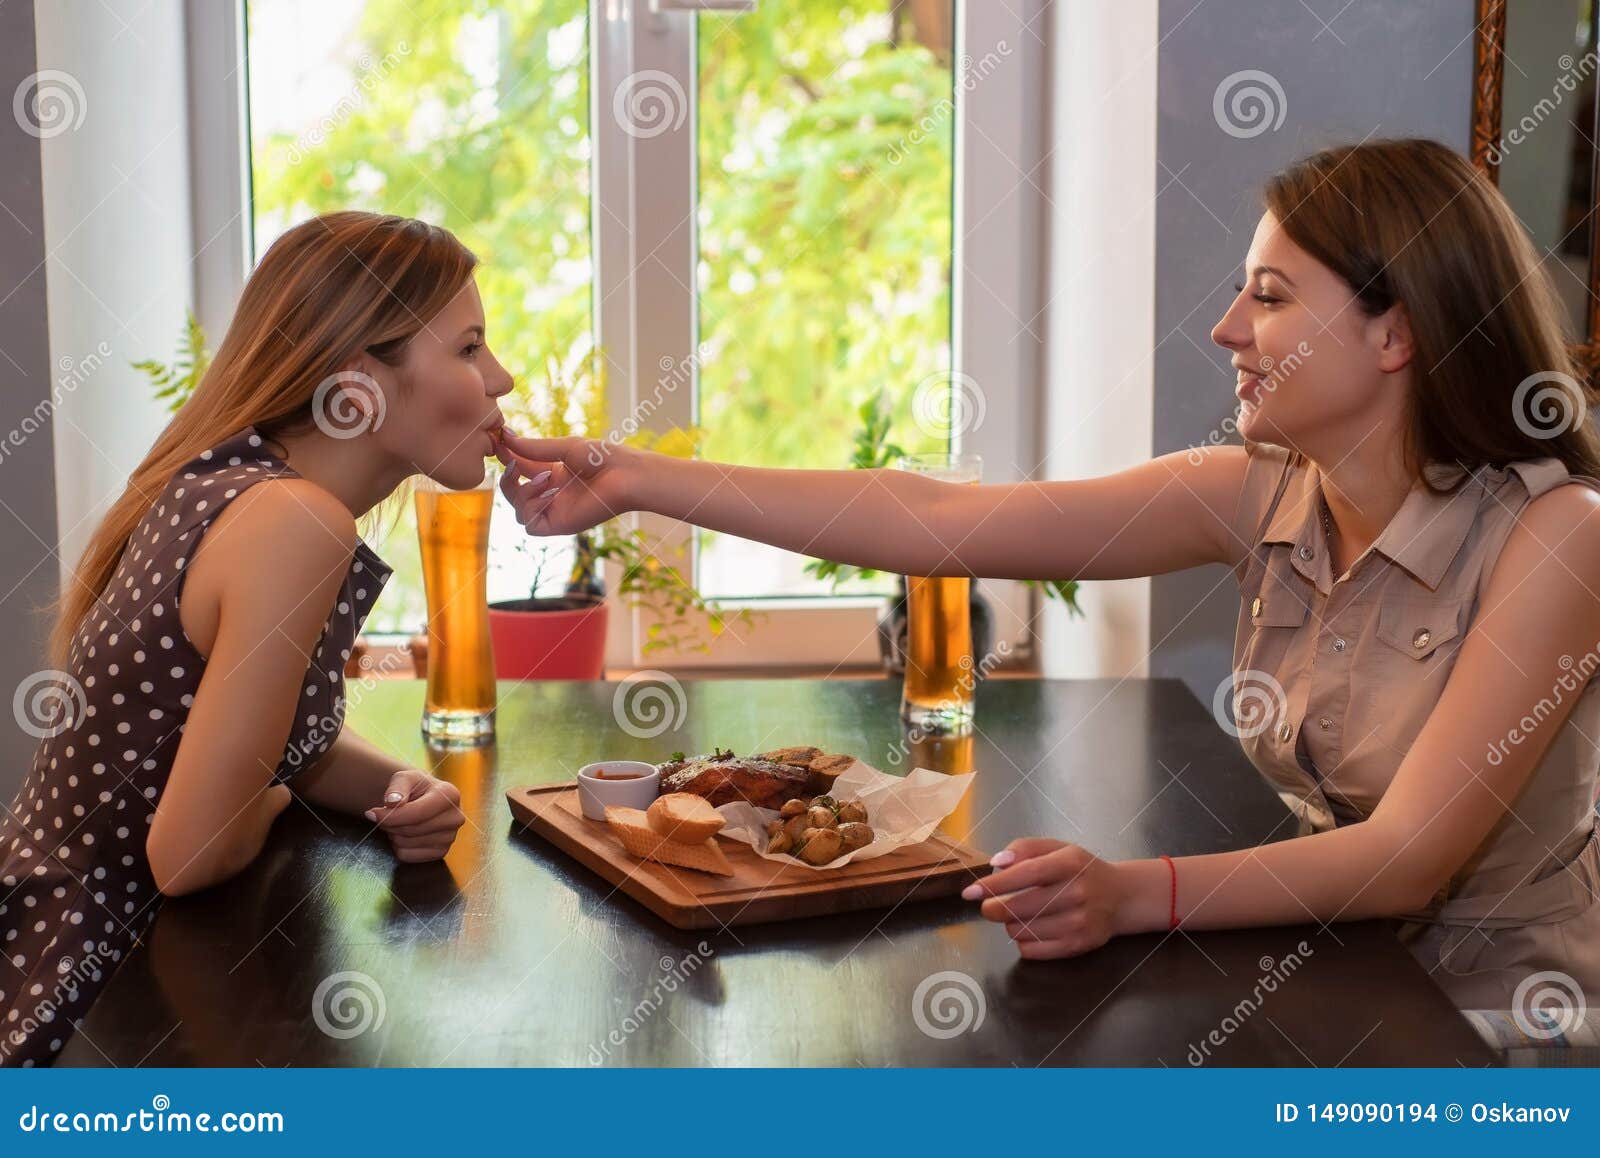 charolette hamilton add photo two women eating each other